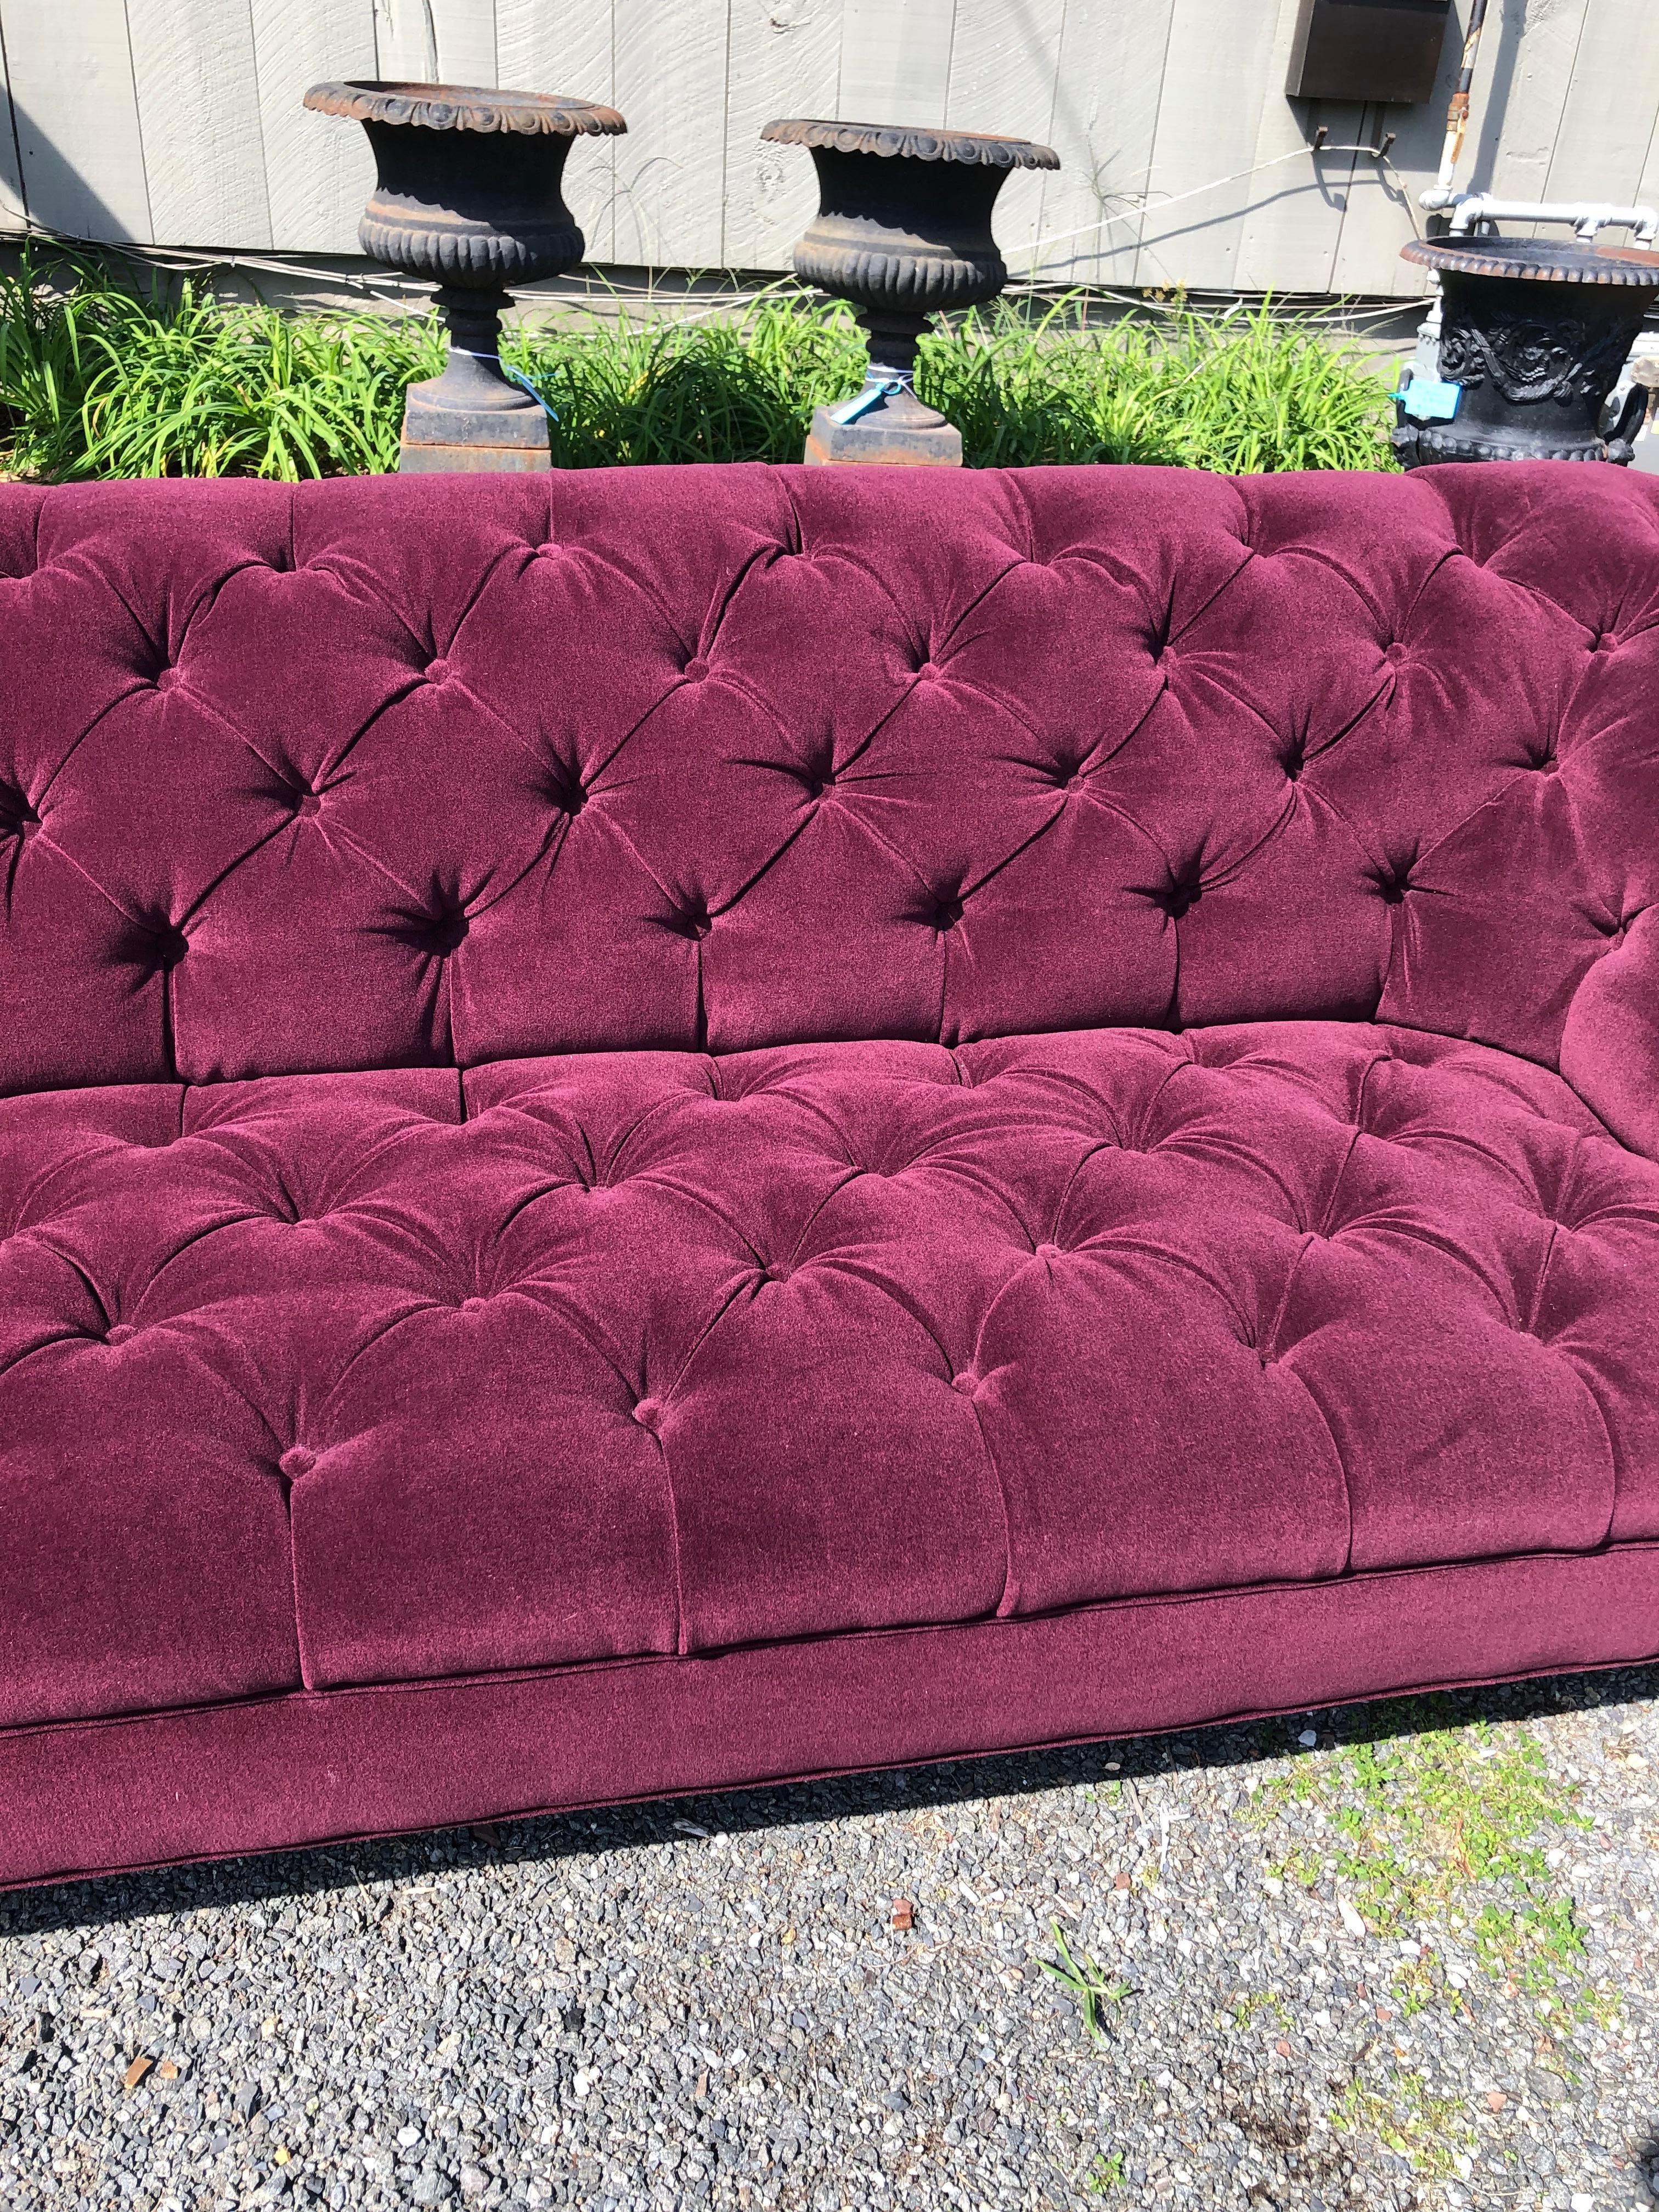 Luxurious Large George Smith Chesterfield Sofa Upholstered in Purple Mohair 6